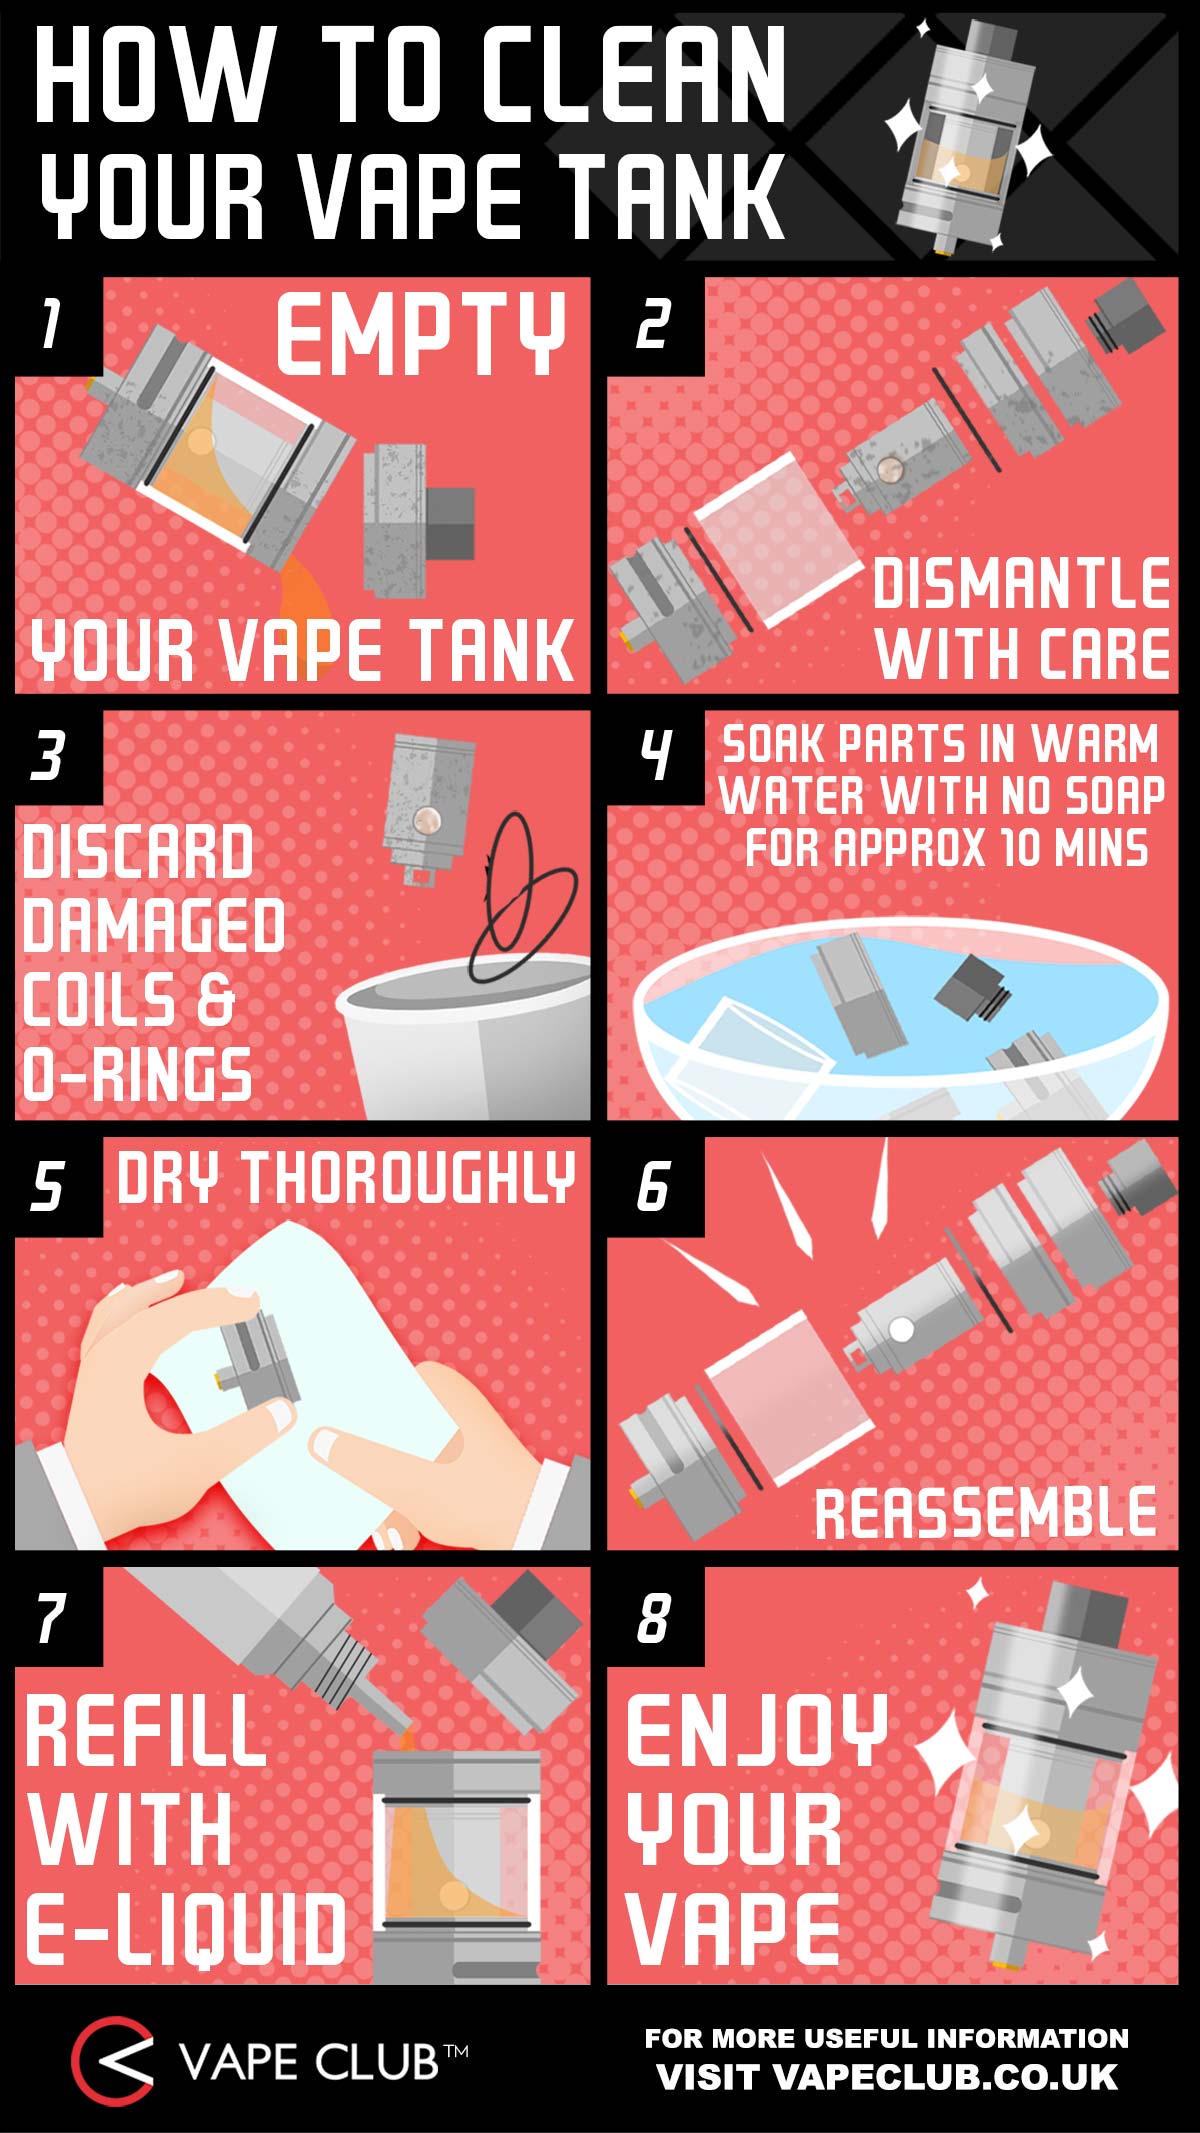 How to clean your vape tank